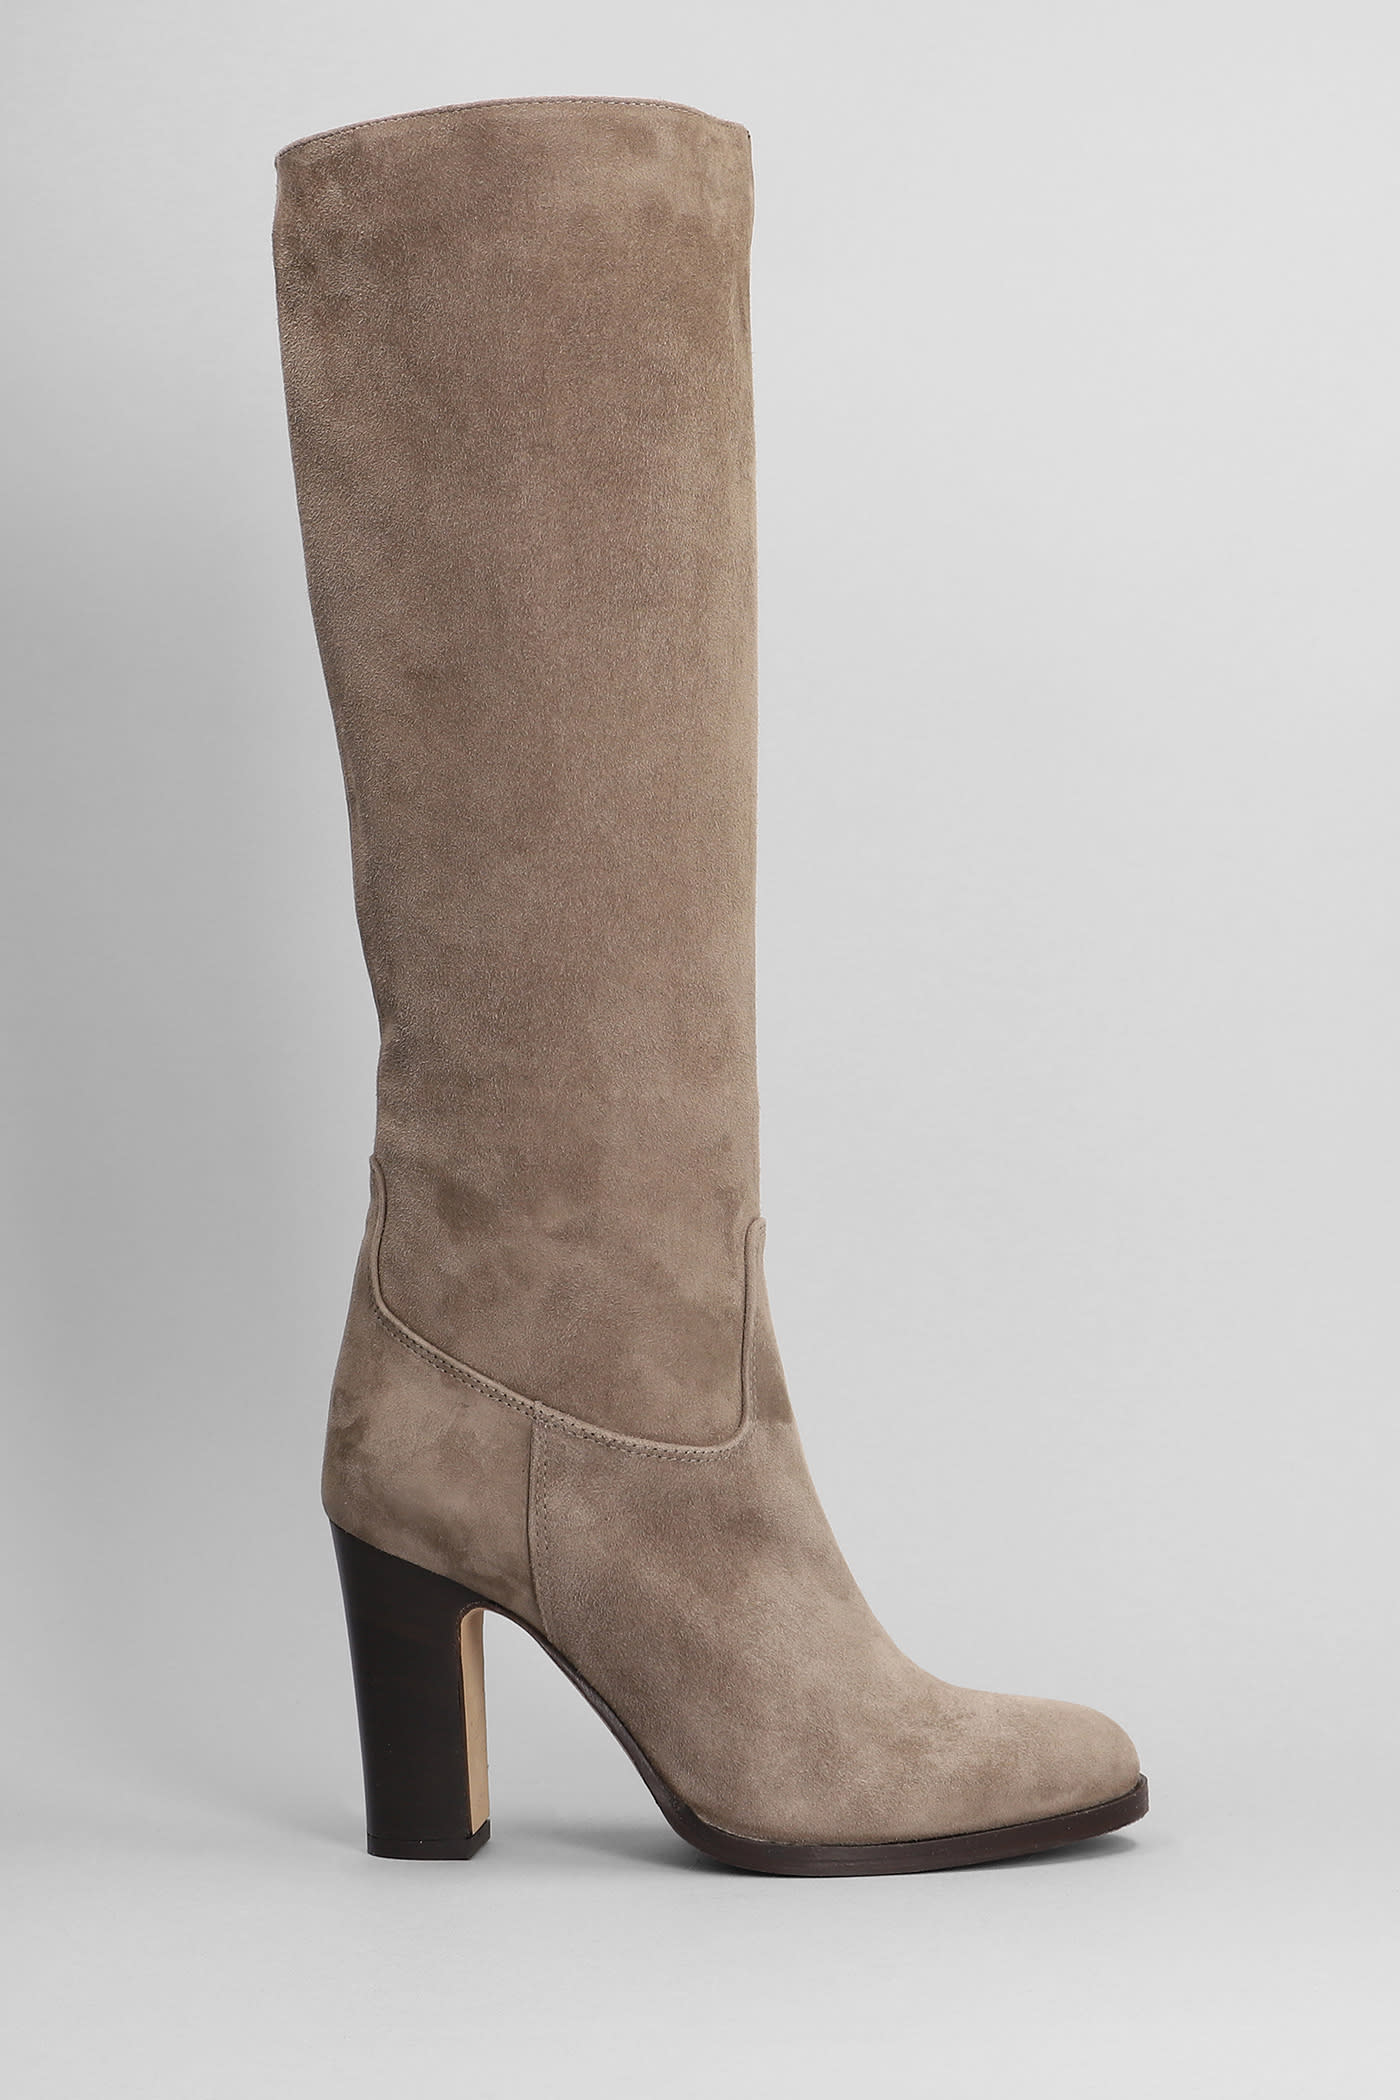 High Heels Boots In Taupe Suede